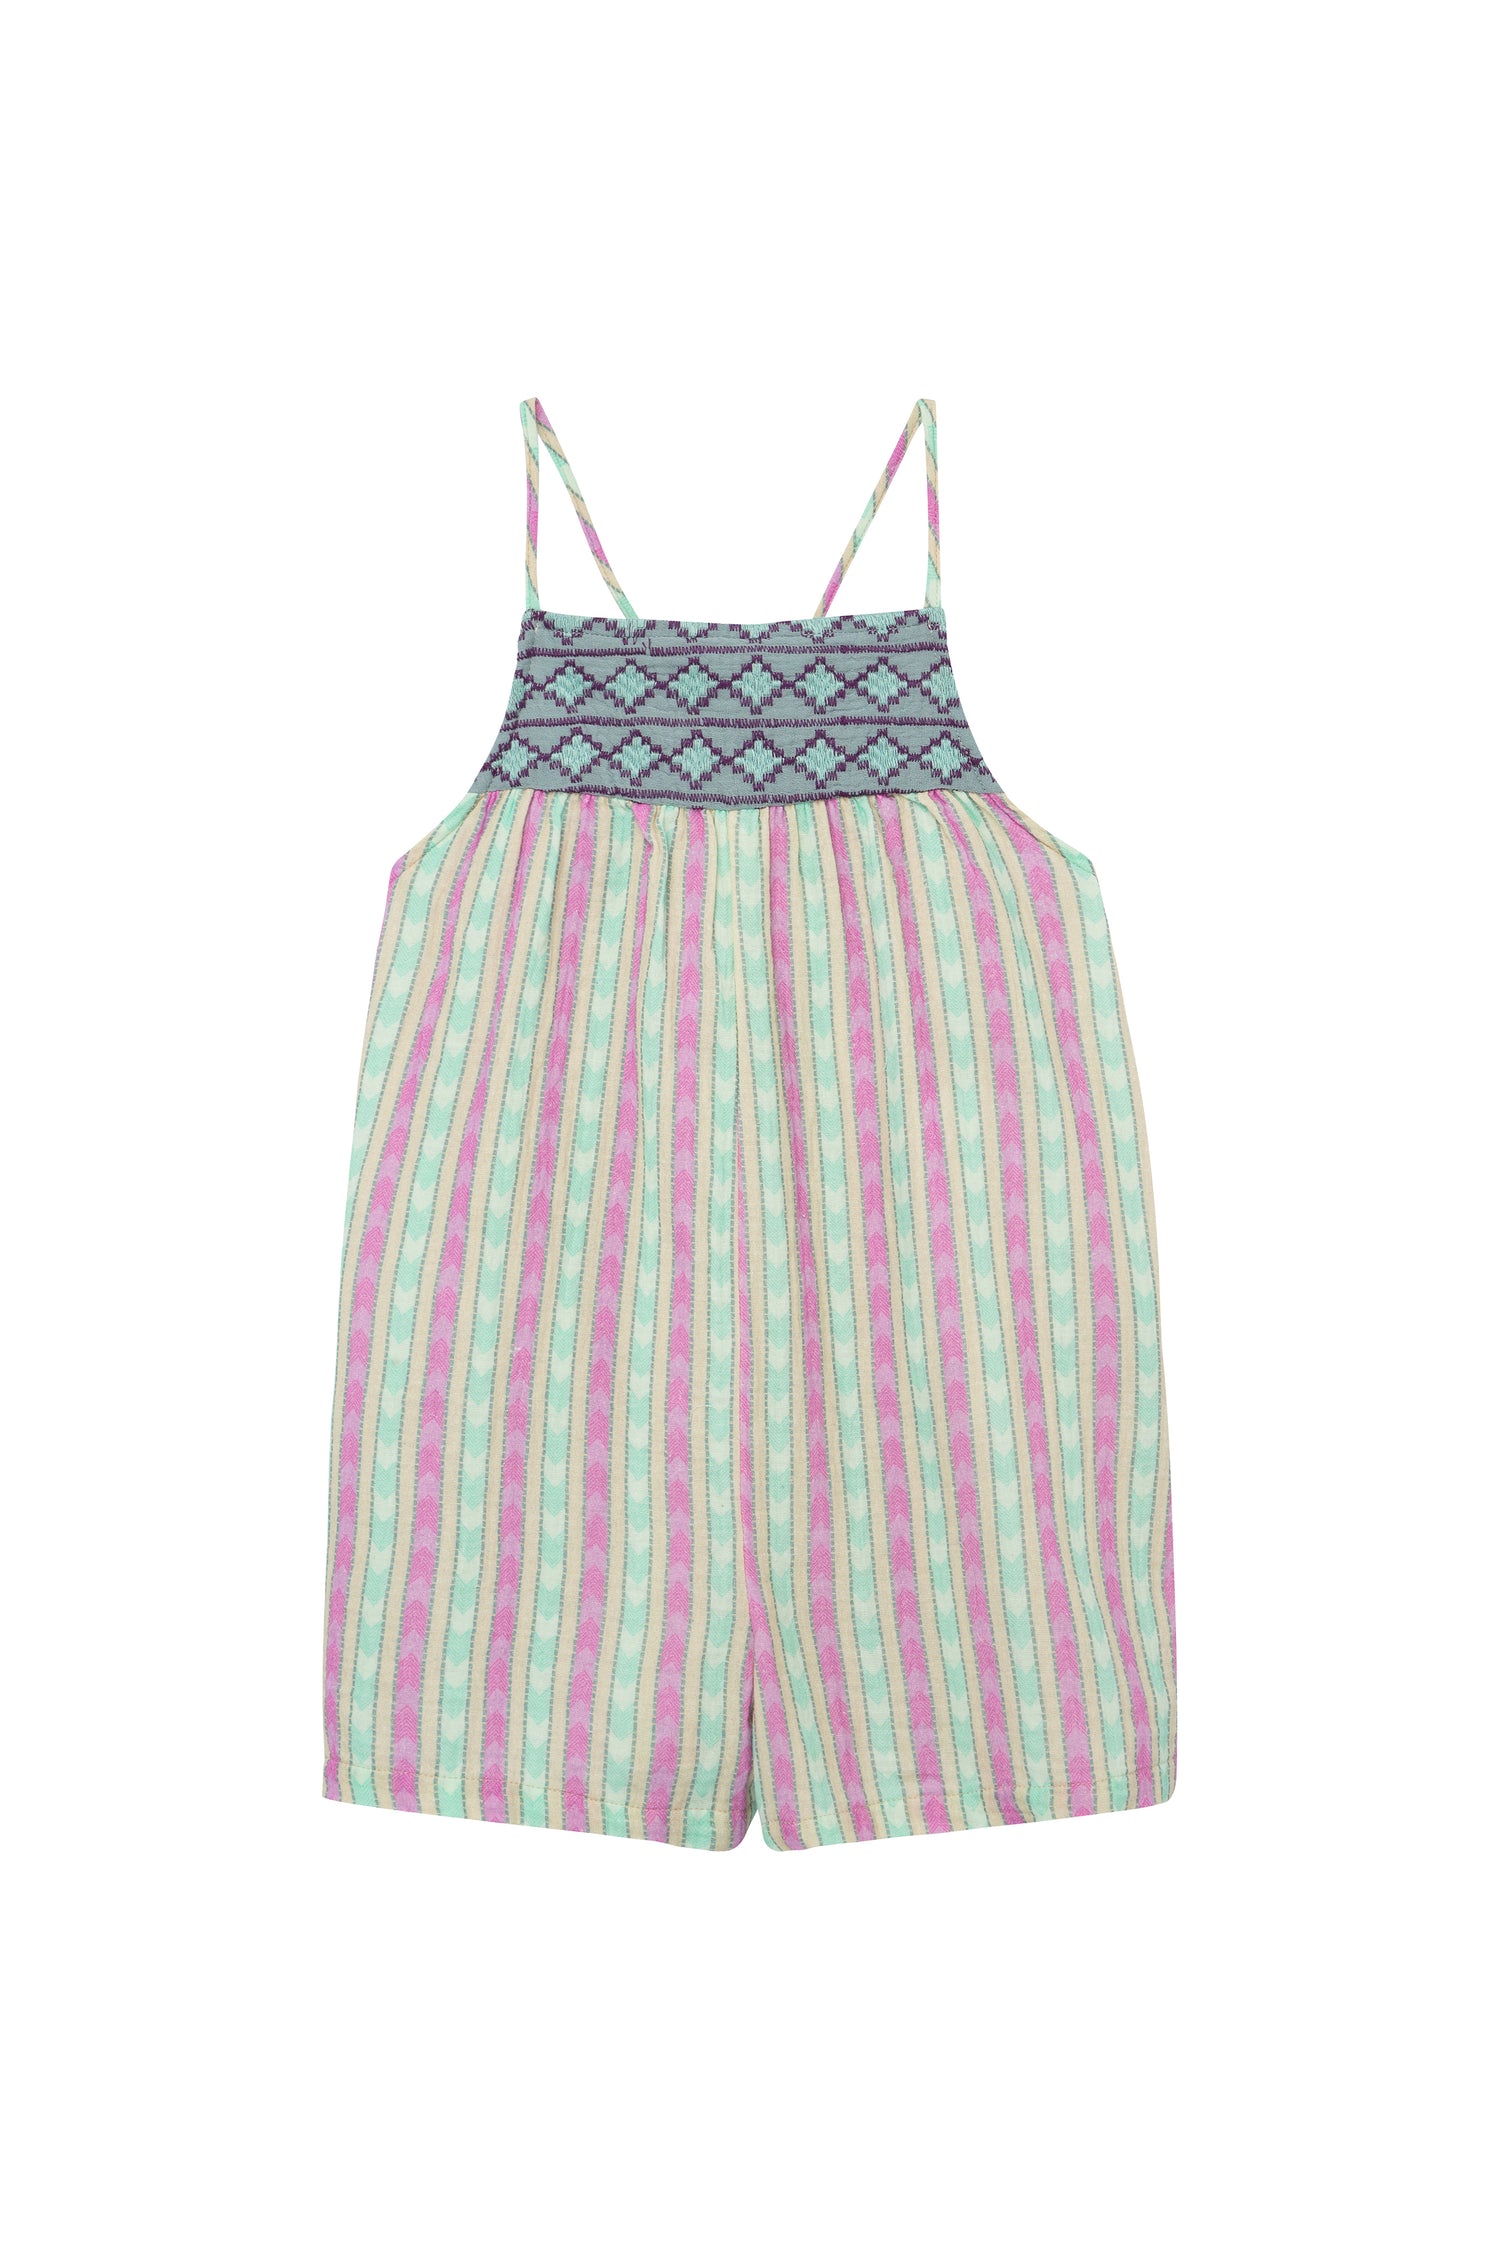 GREEN AND PINK STRIPED GAUZE ROMPER